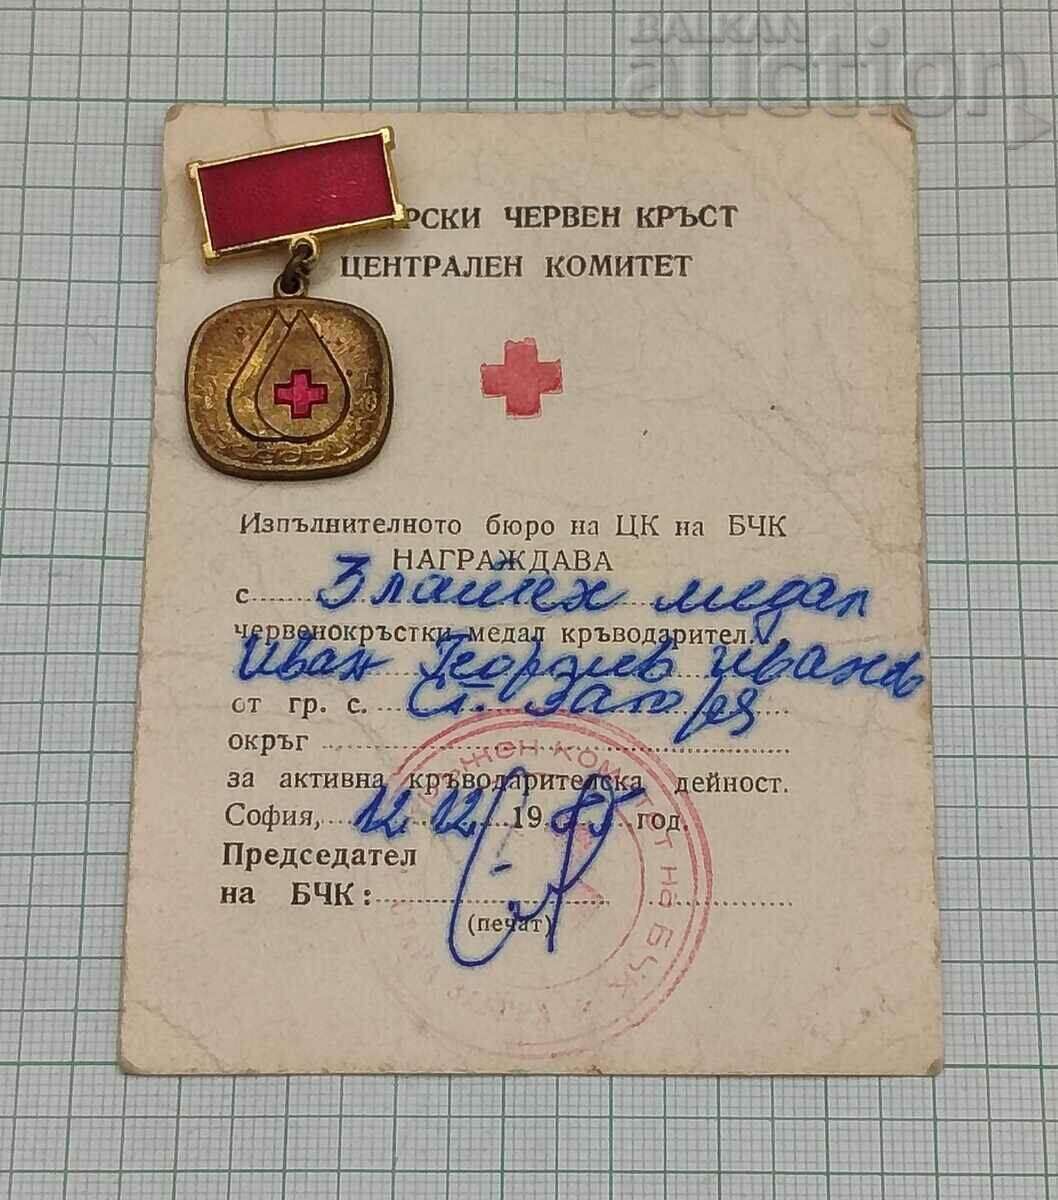 BCHK RED CROSS BLOOD DONOR GOLD MEDAL 1985